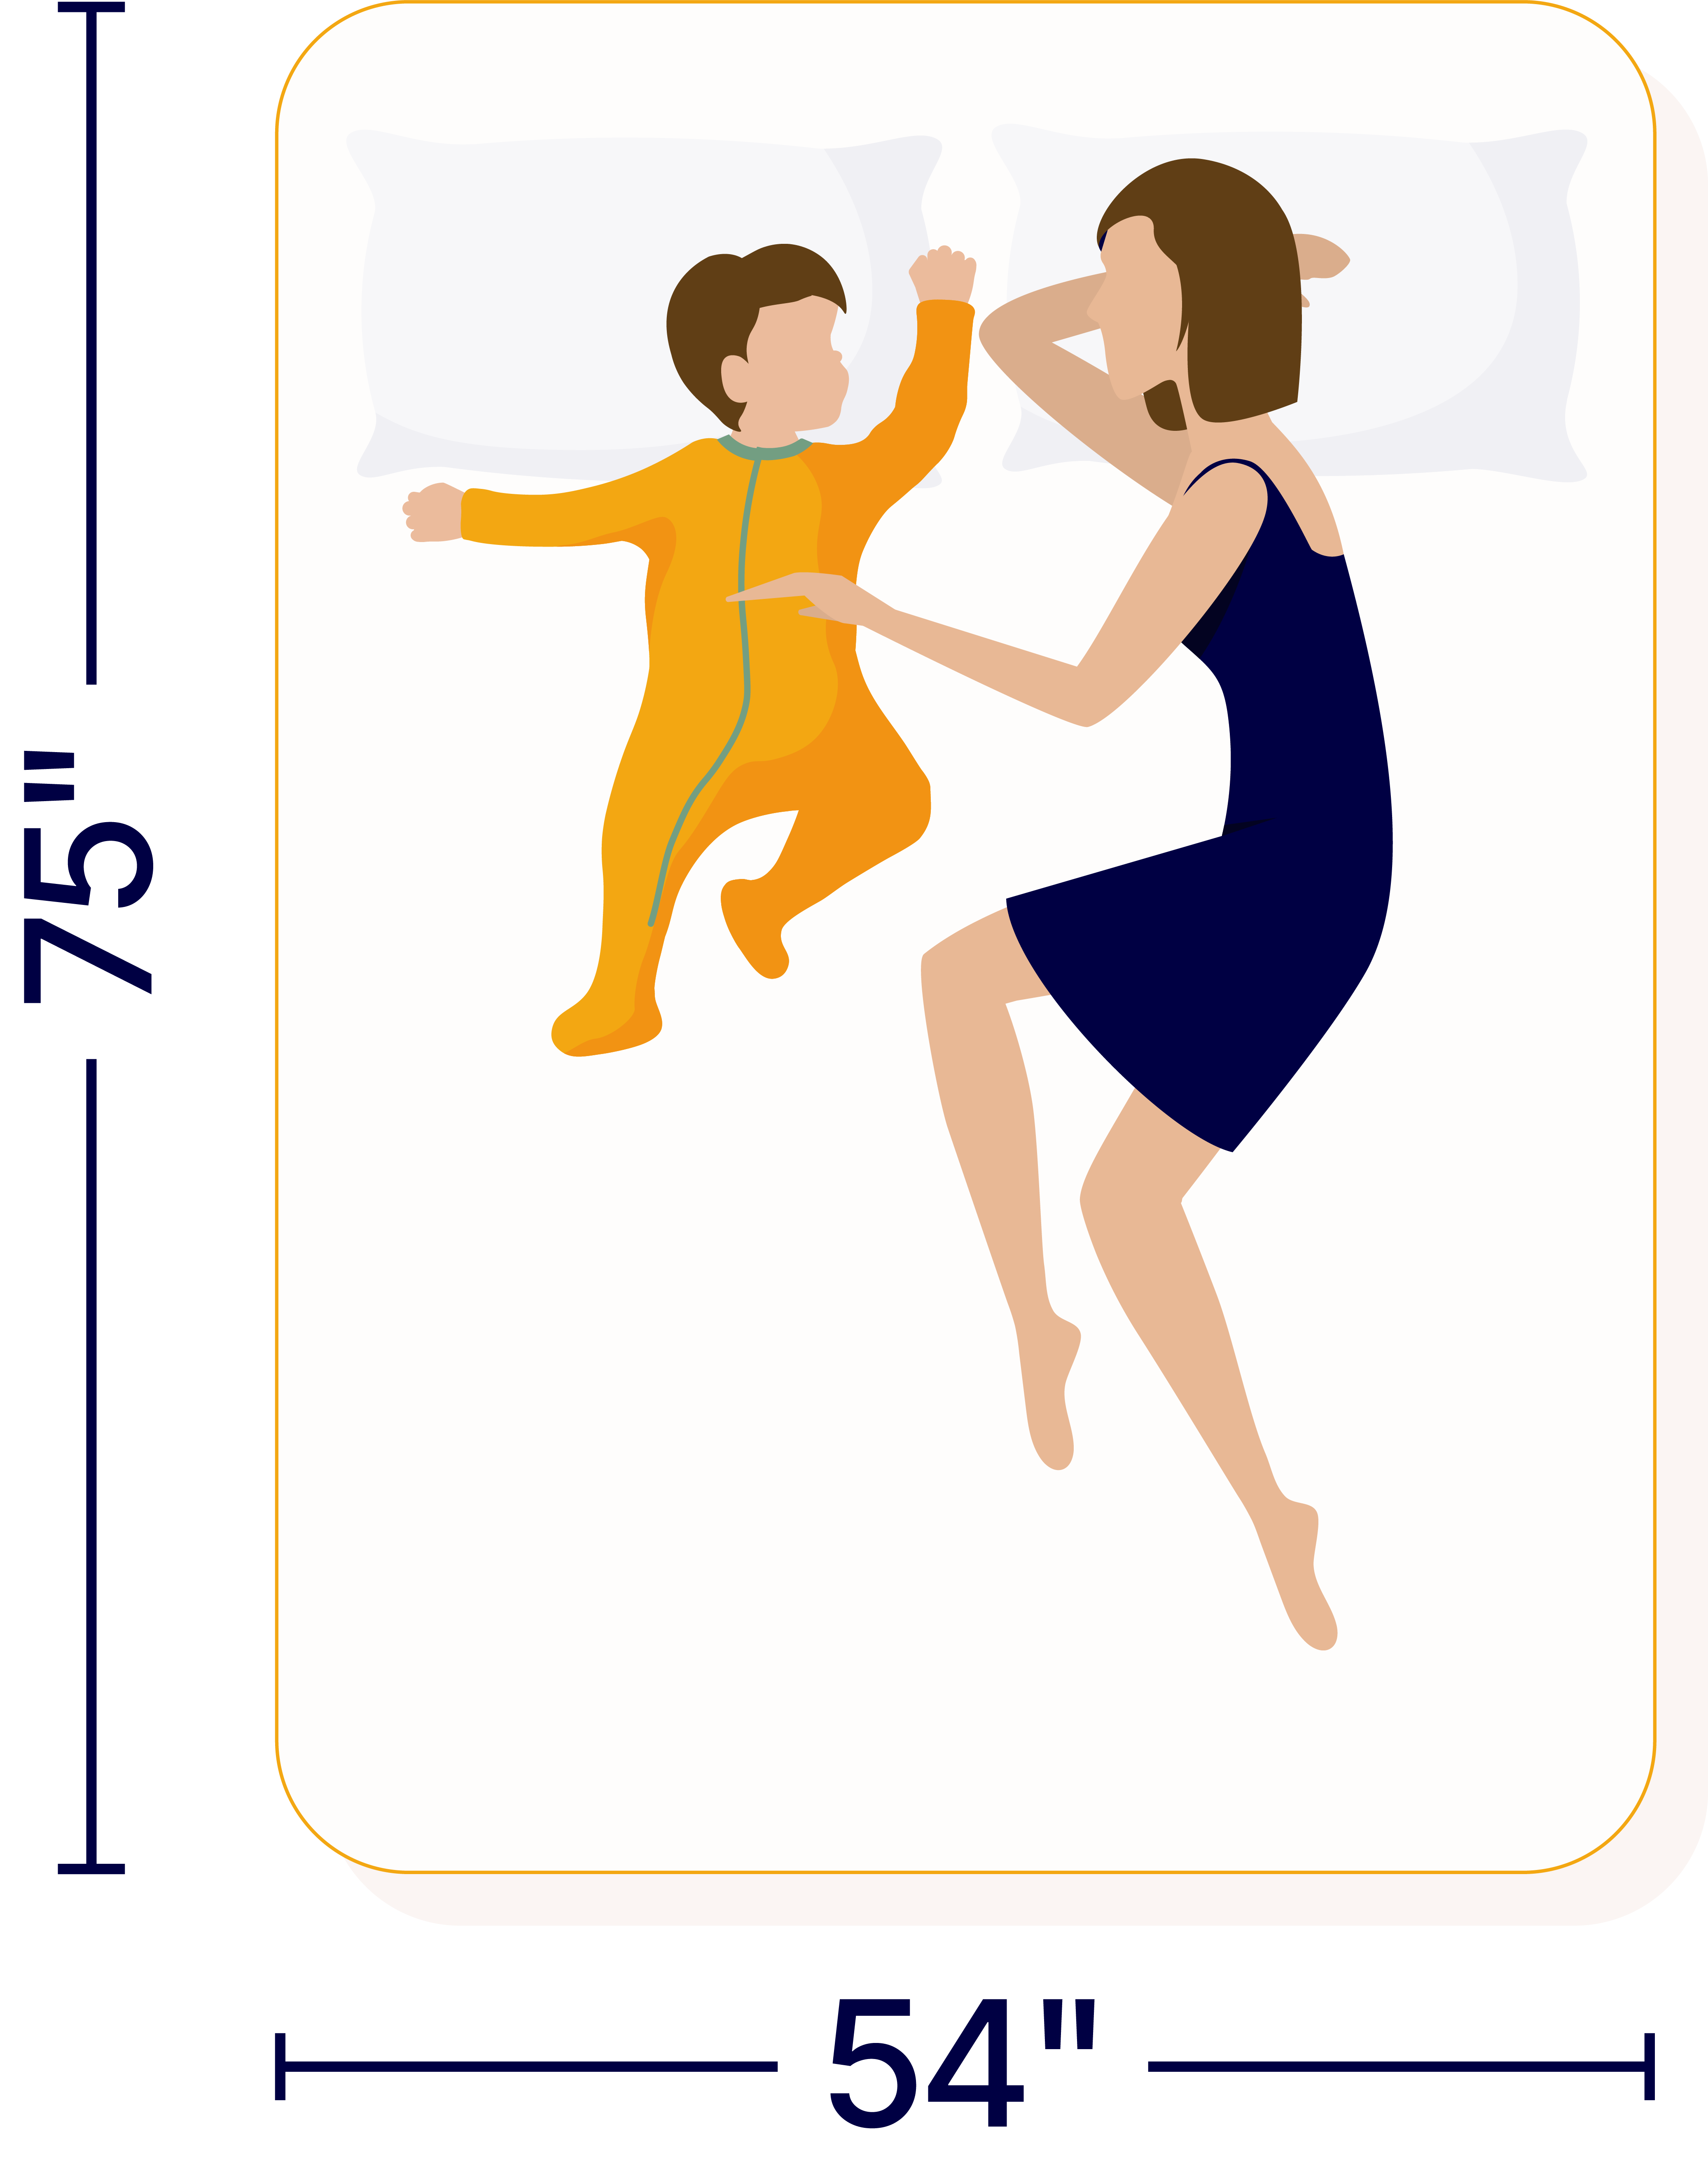 illustration showing an adult and a child lying on a full mattress, with 75